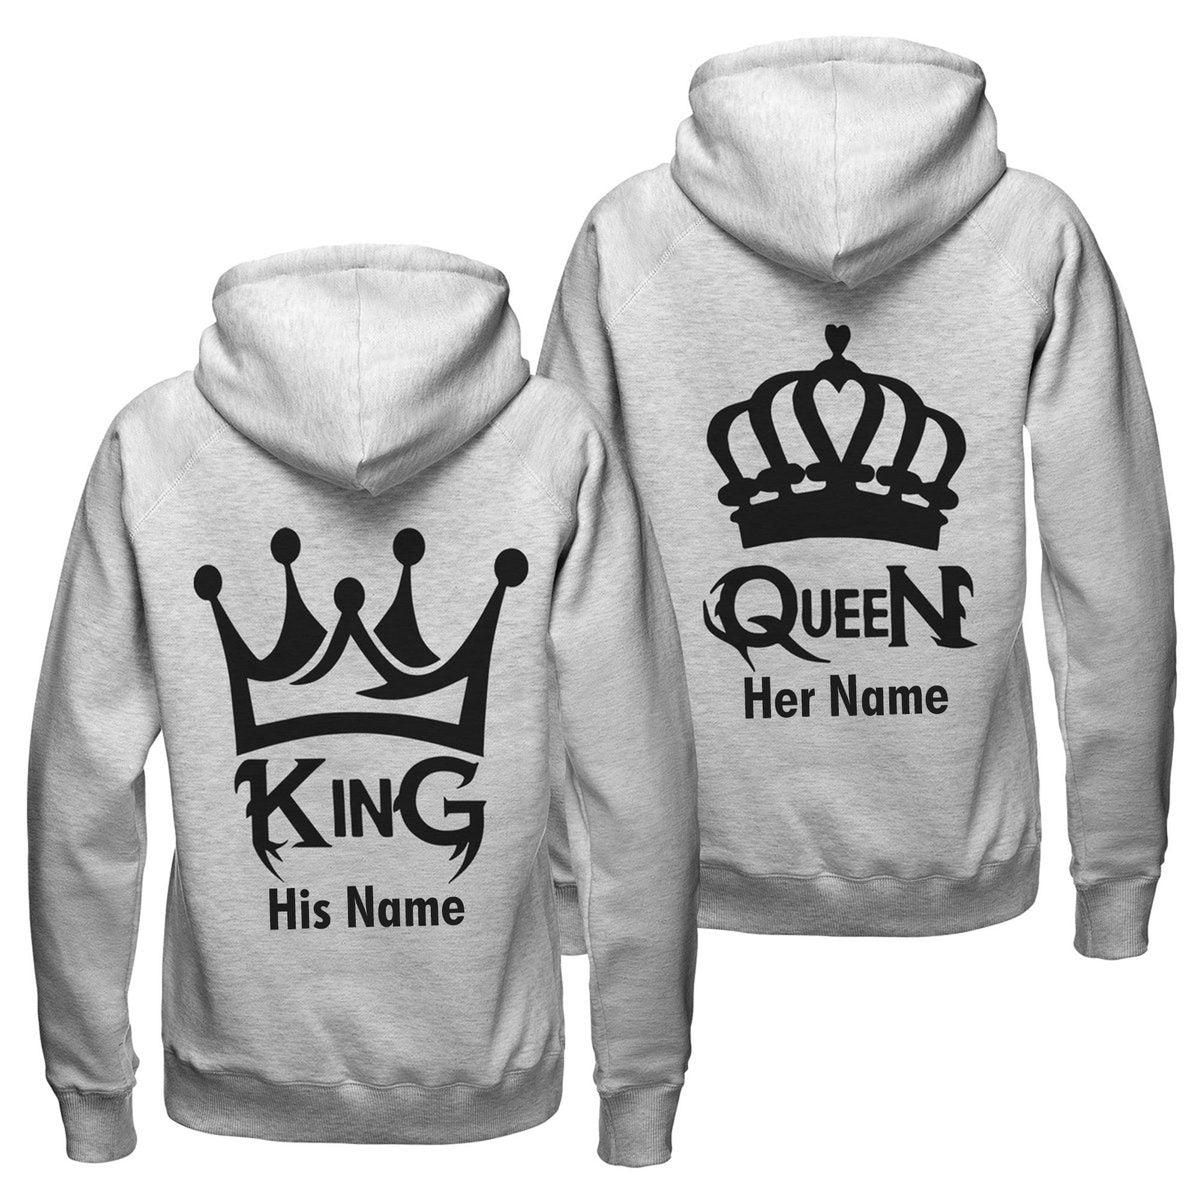 Personalized King/Queen Couple Hoodie, Custom Couple Hoodie, Anniversary Gift, Valentines Day Gift, Hoodie